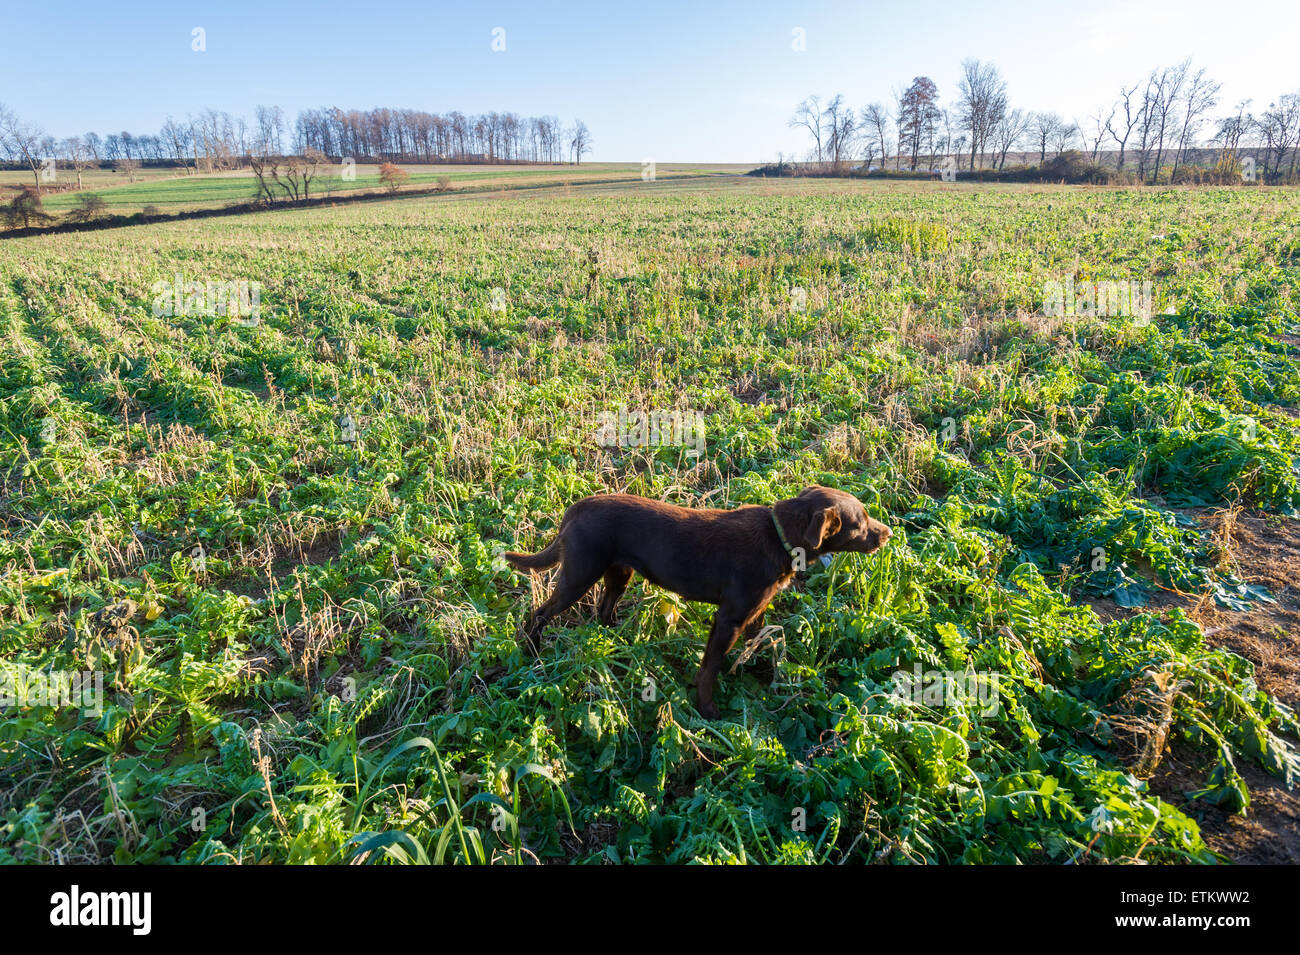 Brown dog standing in a field of Diakon Radish plants, a cover crop in Holtwood, Pennsylvania, USA Stock Photo